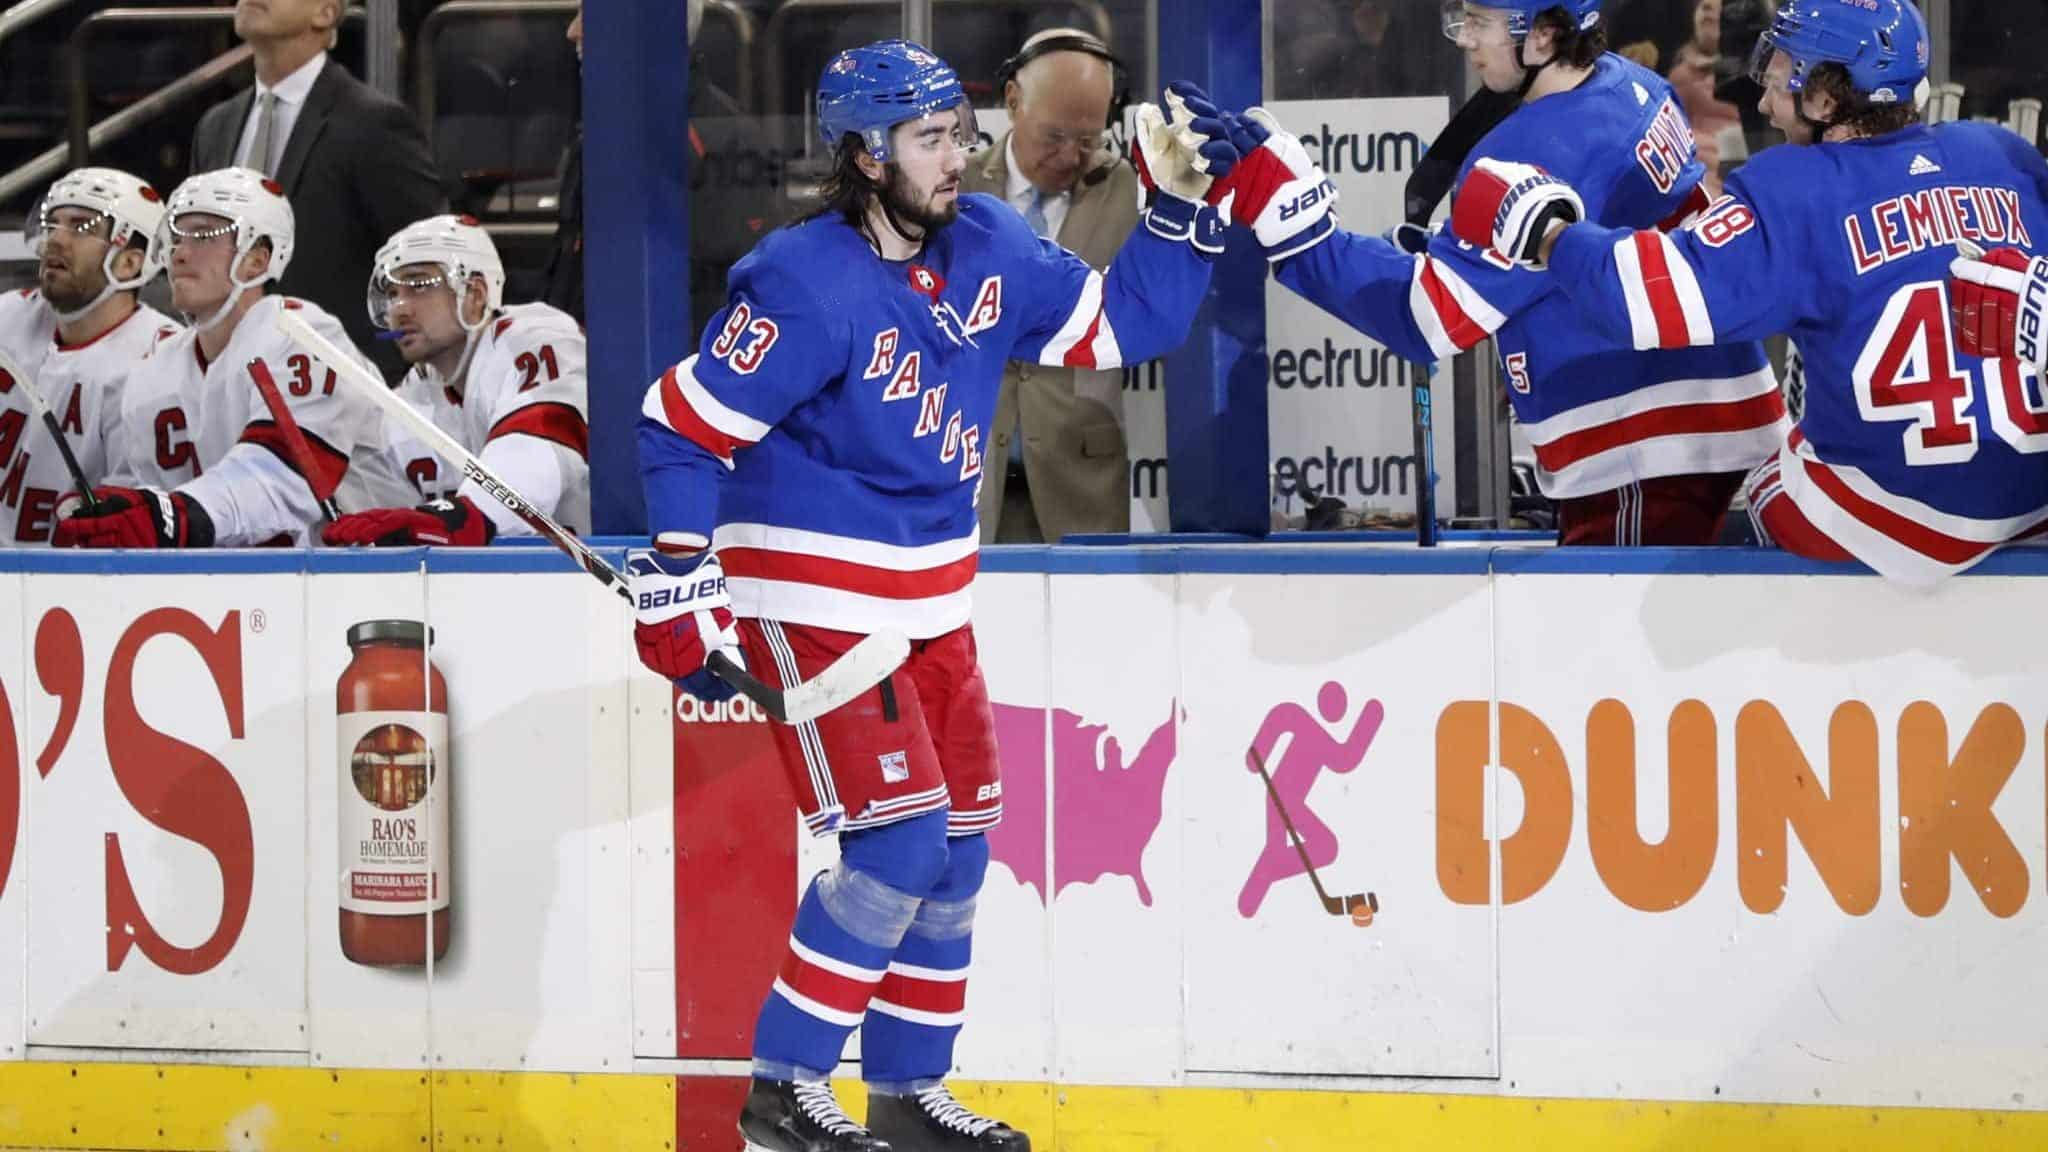 New York Rangers center Mika Zibanejad (93) is congratulated after he scored during the first period of the team's NHL hockey game against the Carolina Hurricanes, Friday, Dec. 27, 2019, in New York.